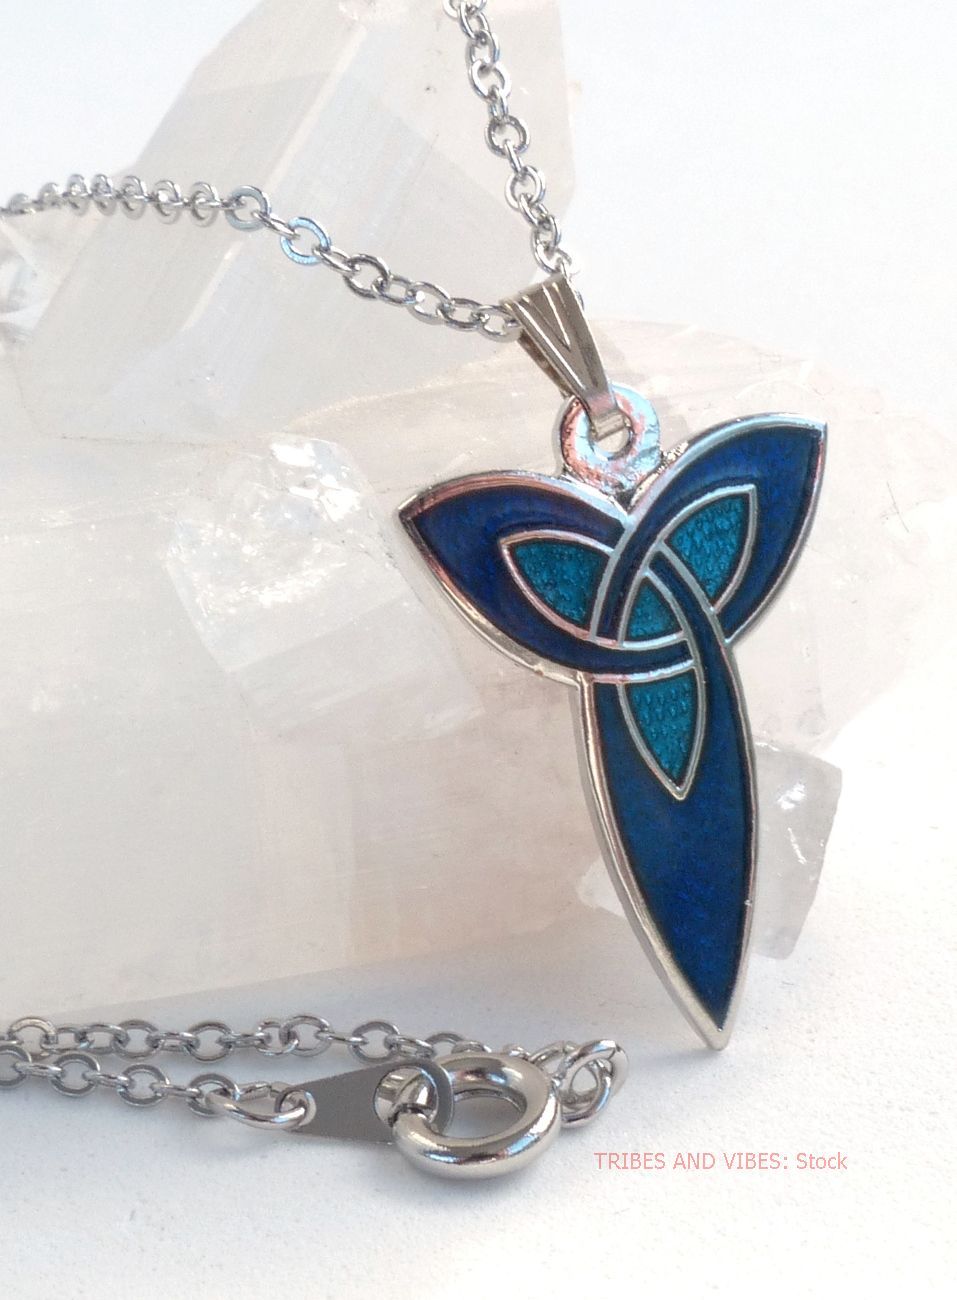 Blue Triquetra Trinity Knot Pendant Silver Plate Necklace by Sea Gems (stoc